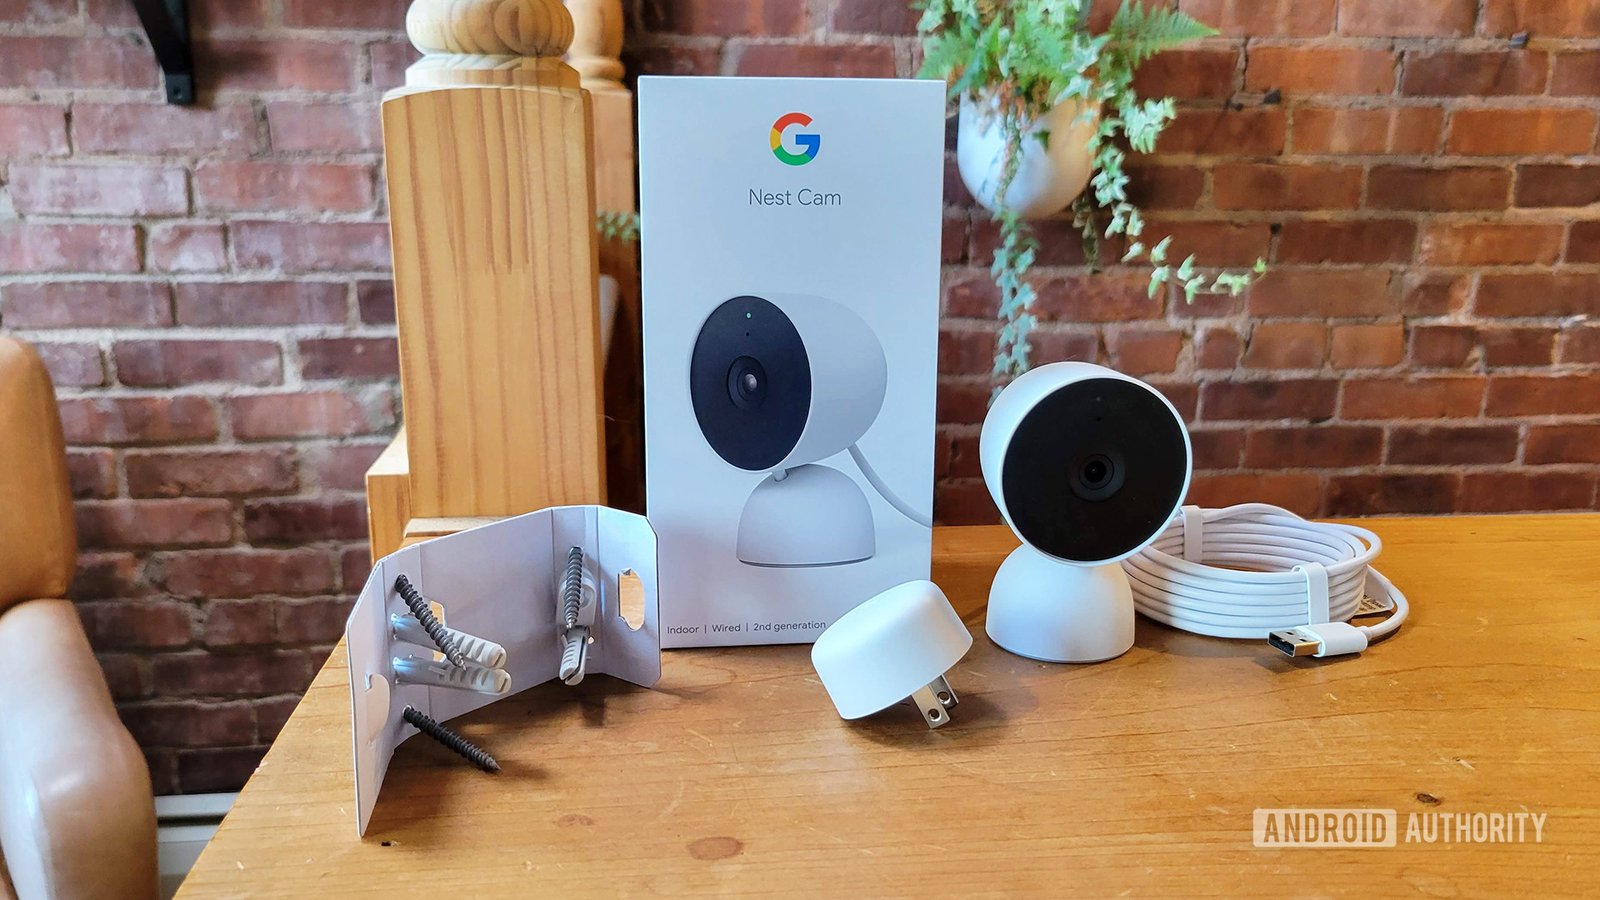 More evidence suggests Nest Aware is coming to Google One